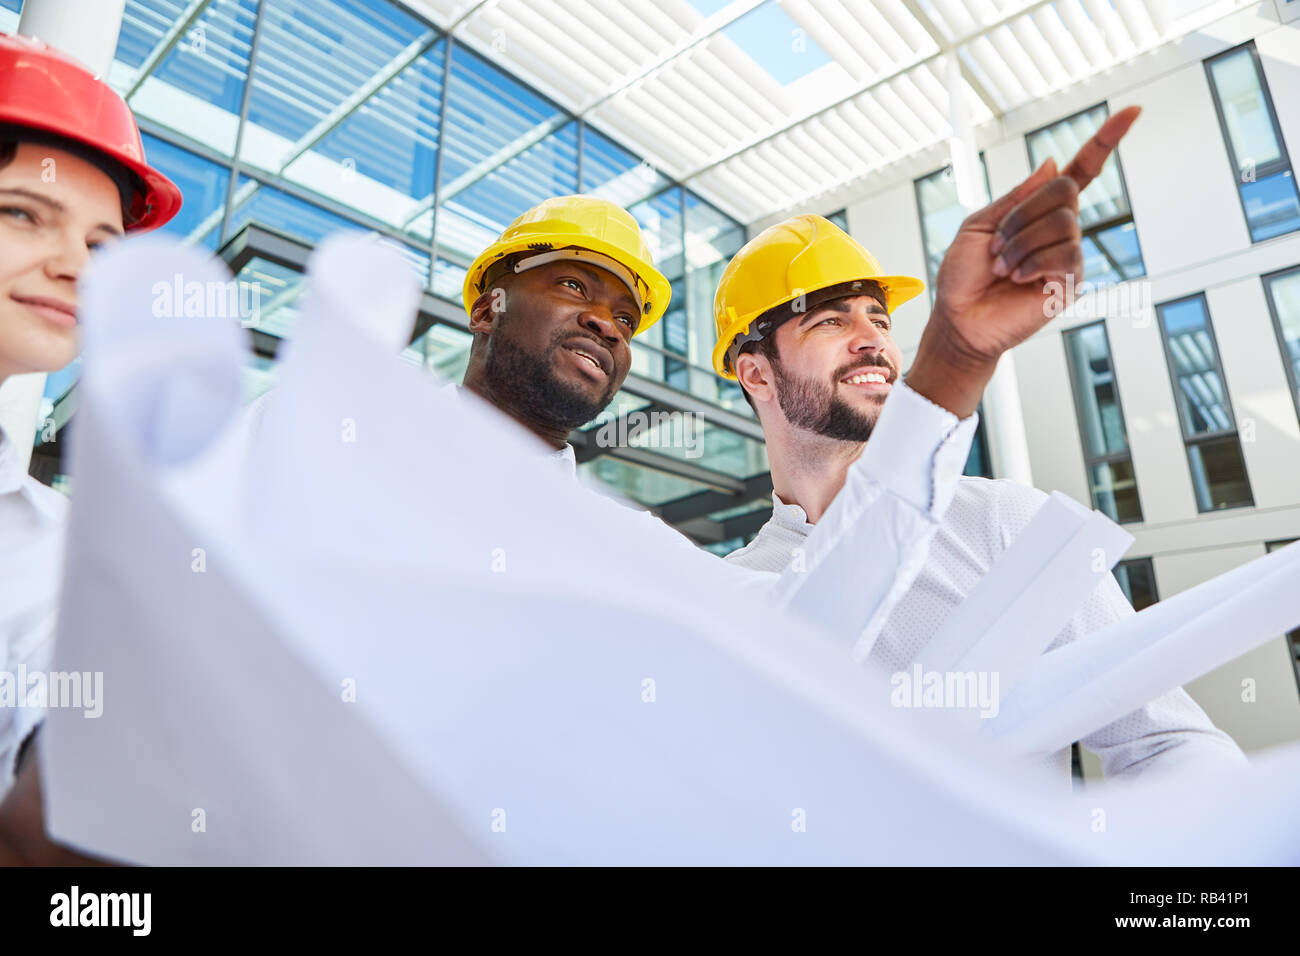 Architect and his engineering team has a vision for a urban design project Stock Photo